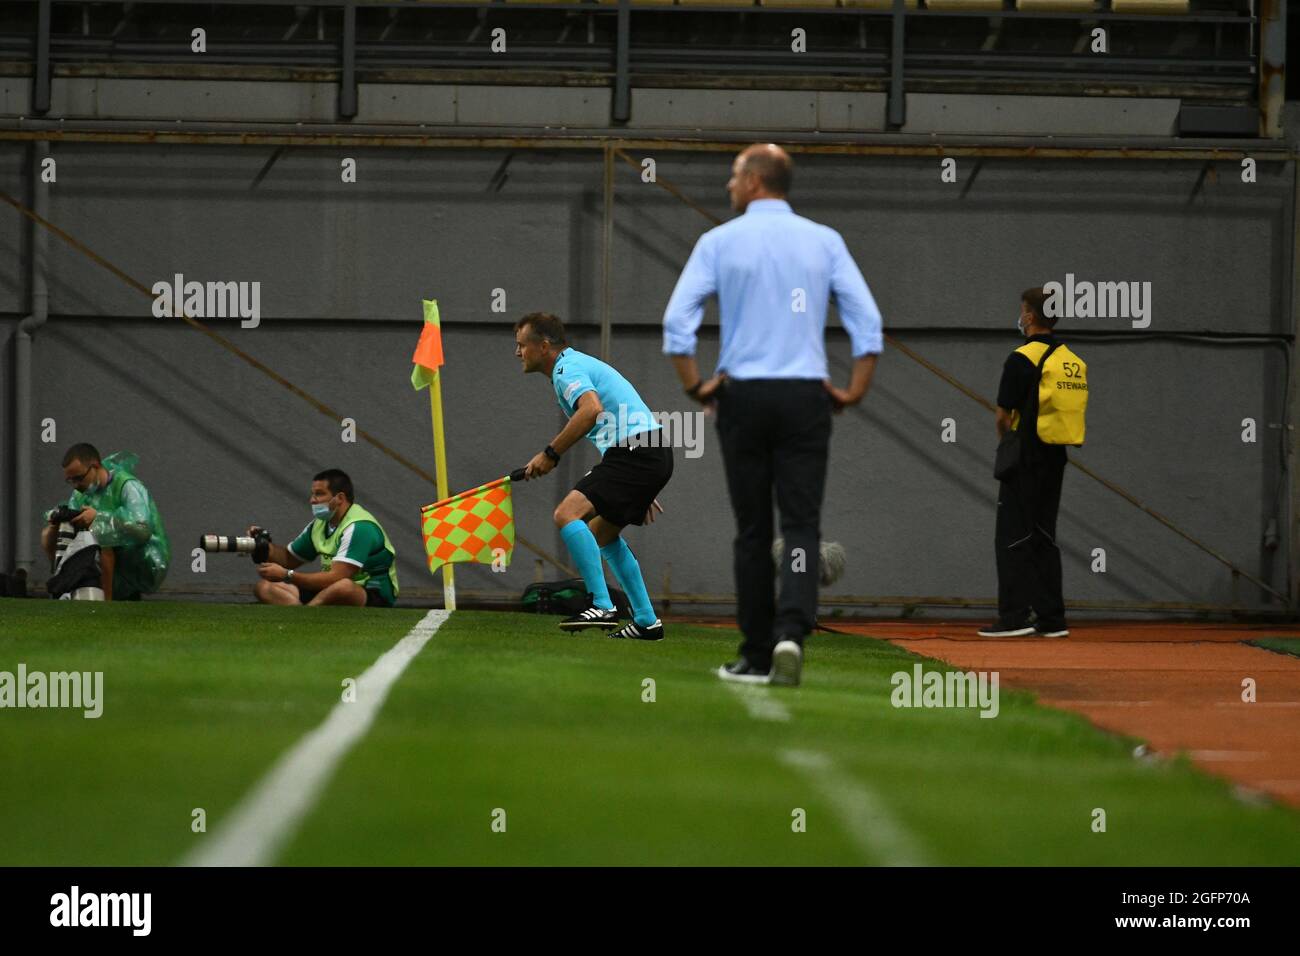 ZAPORIZHZHIA, UKRAINE - AUGUST 26, 2021 - An assistant referee is seen on the sideline during the 2021/2022 UEFA Europa League play-off 2nd leg game between FC Zorya Luhansk and SK Rapid Wien at the Slavutych Arena, Zaporizhzhia, southeastern Ukraine. Stock Photo